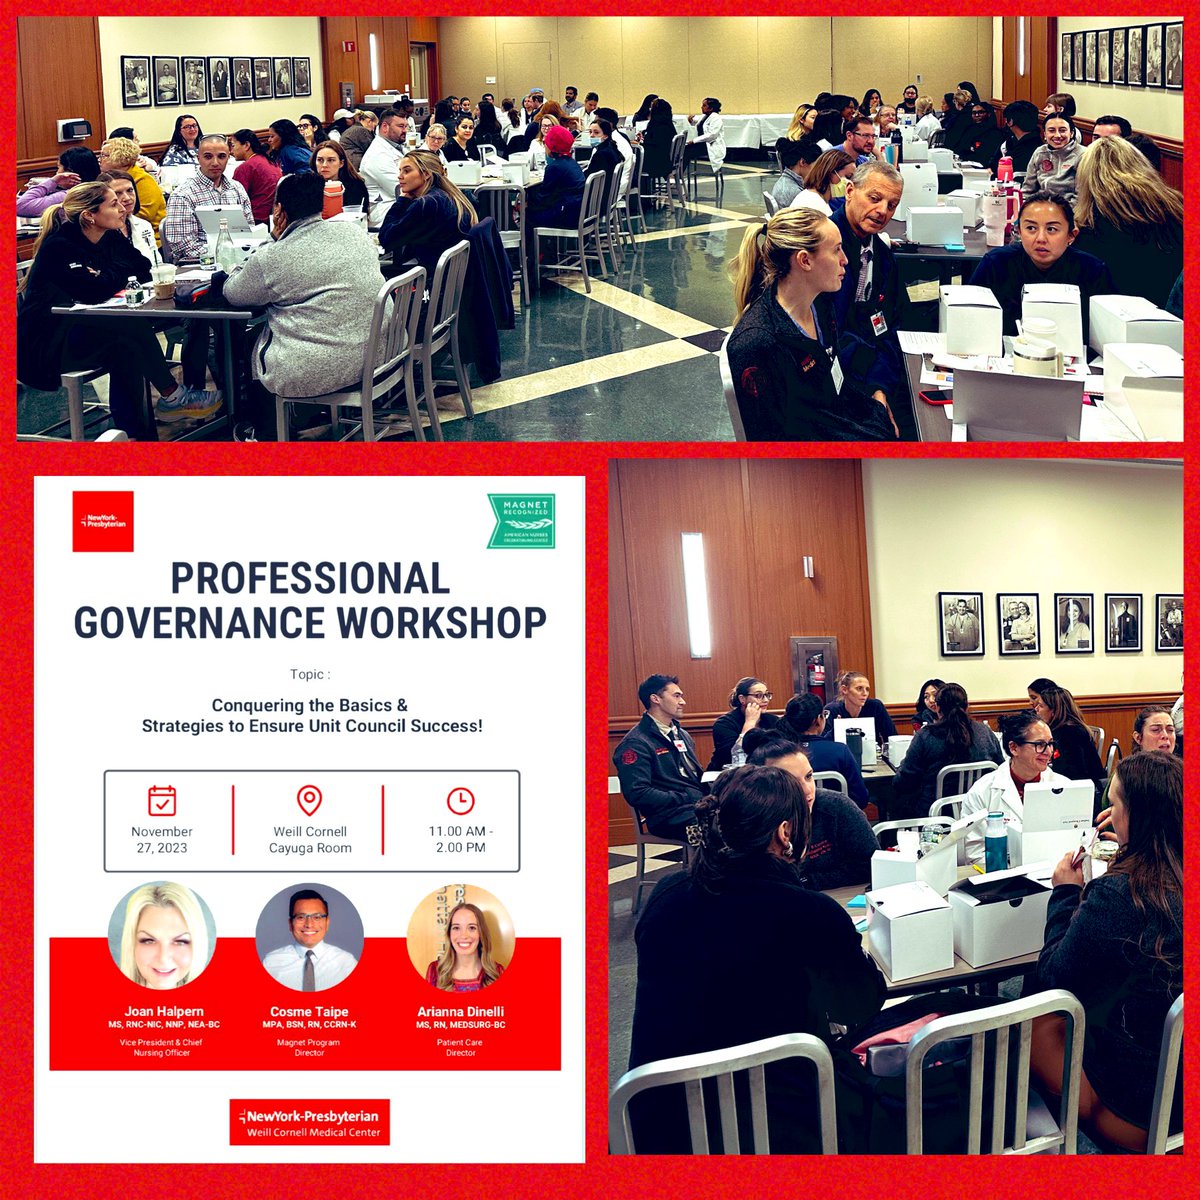 A day of reinvigoration for our Professional Governance structure! Thank you to all of our clinical nurses who lead unit councils or a campus committee and to our nursing leadership team for supporting and cultivating this foundational work! #nursingexcellence @WillieMManzano